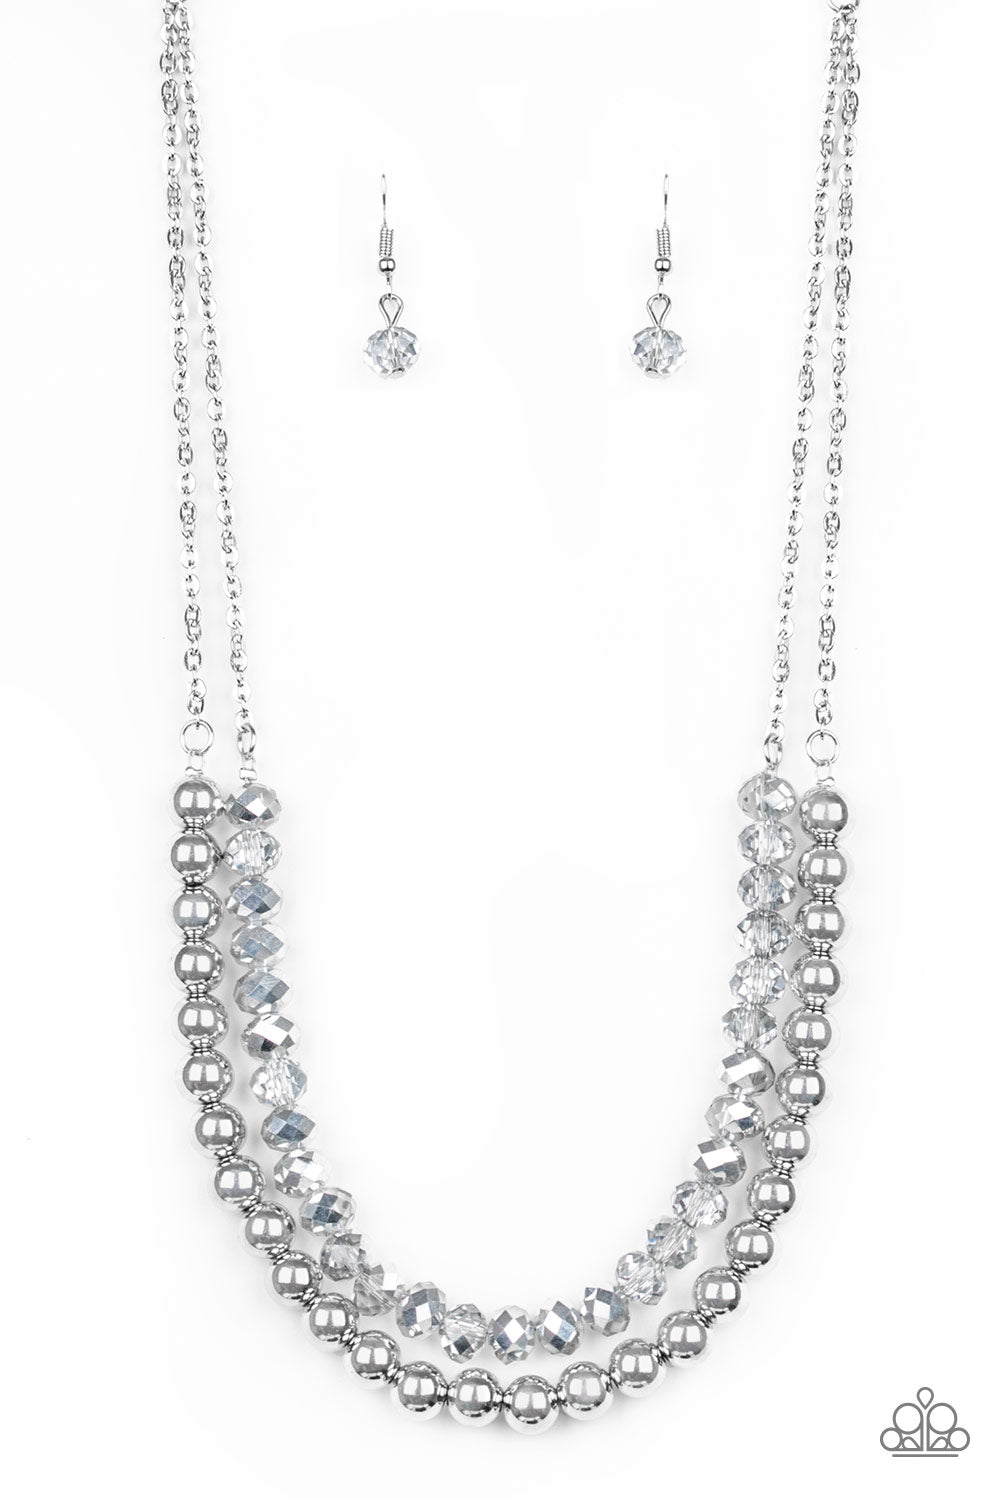 Paparazzi Necklaces - Color Of The Day - Silver